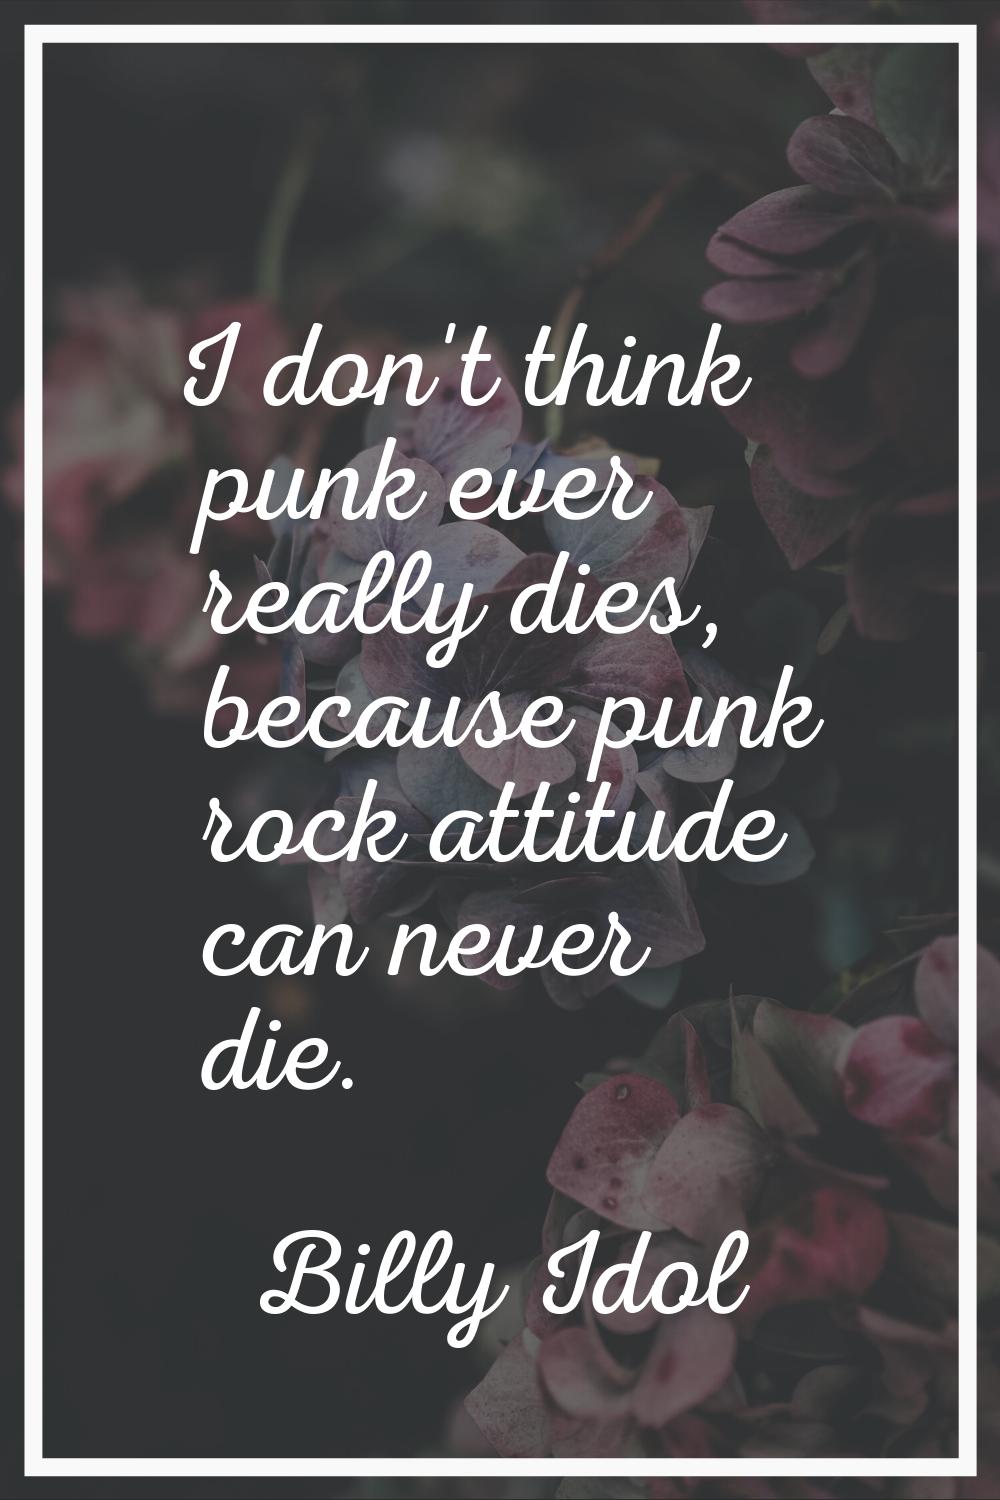 I don't think punk ever really dies, because punk rock attitude can never die.